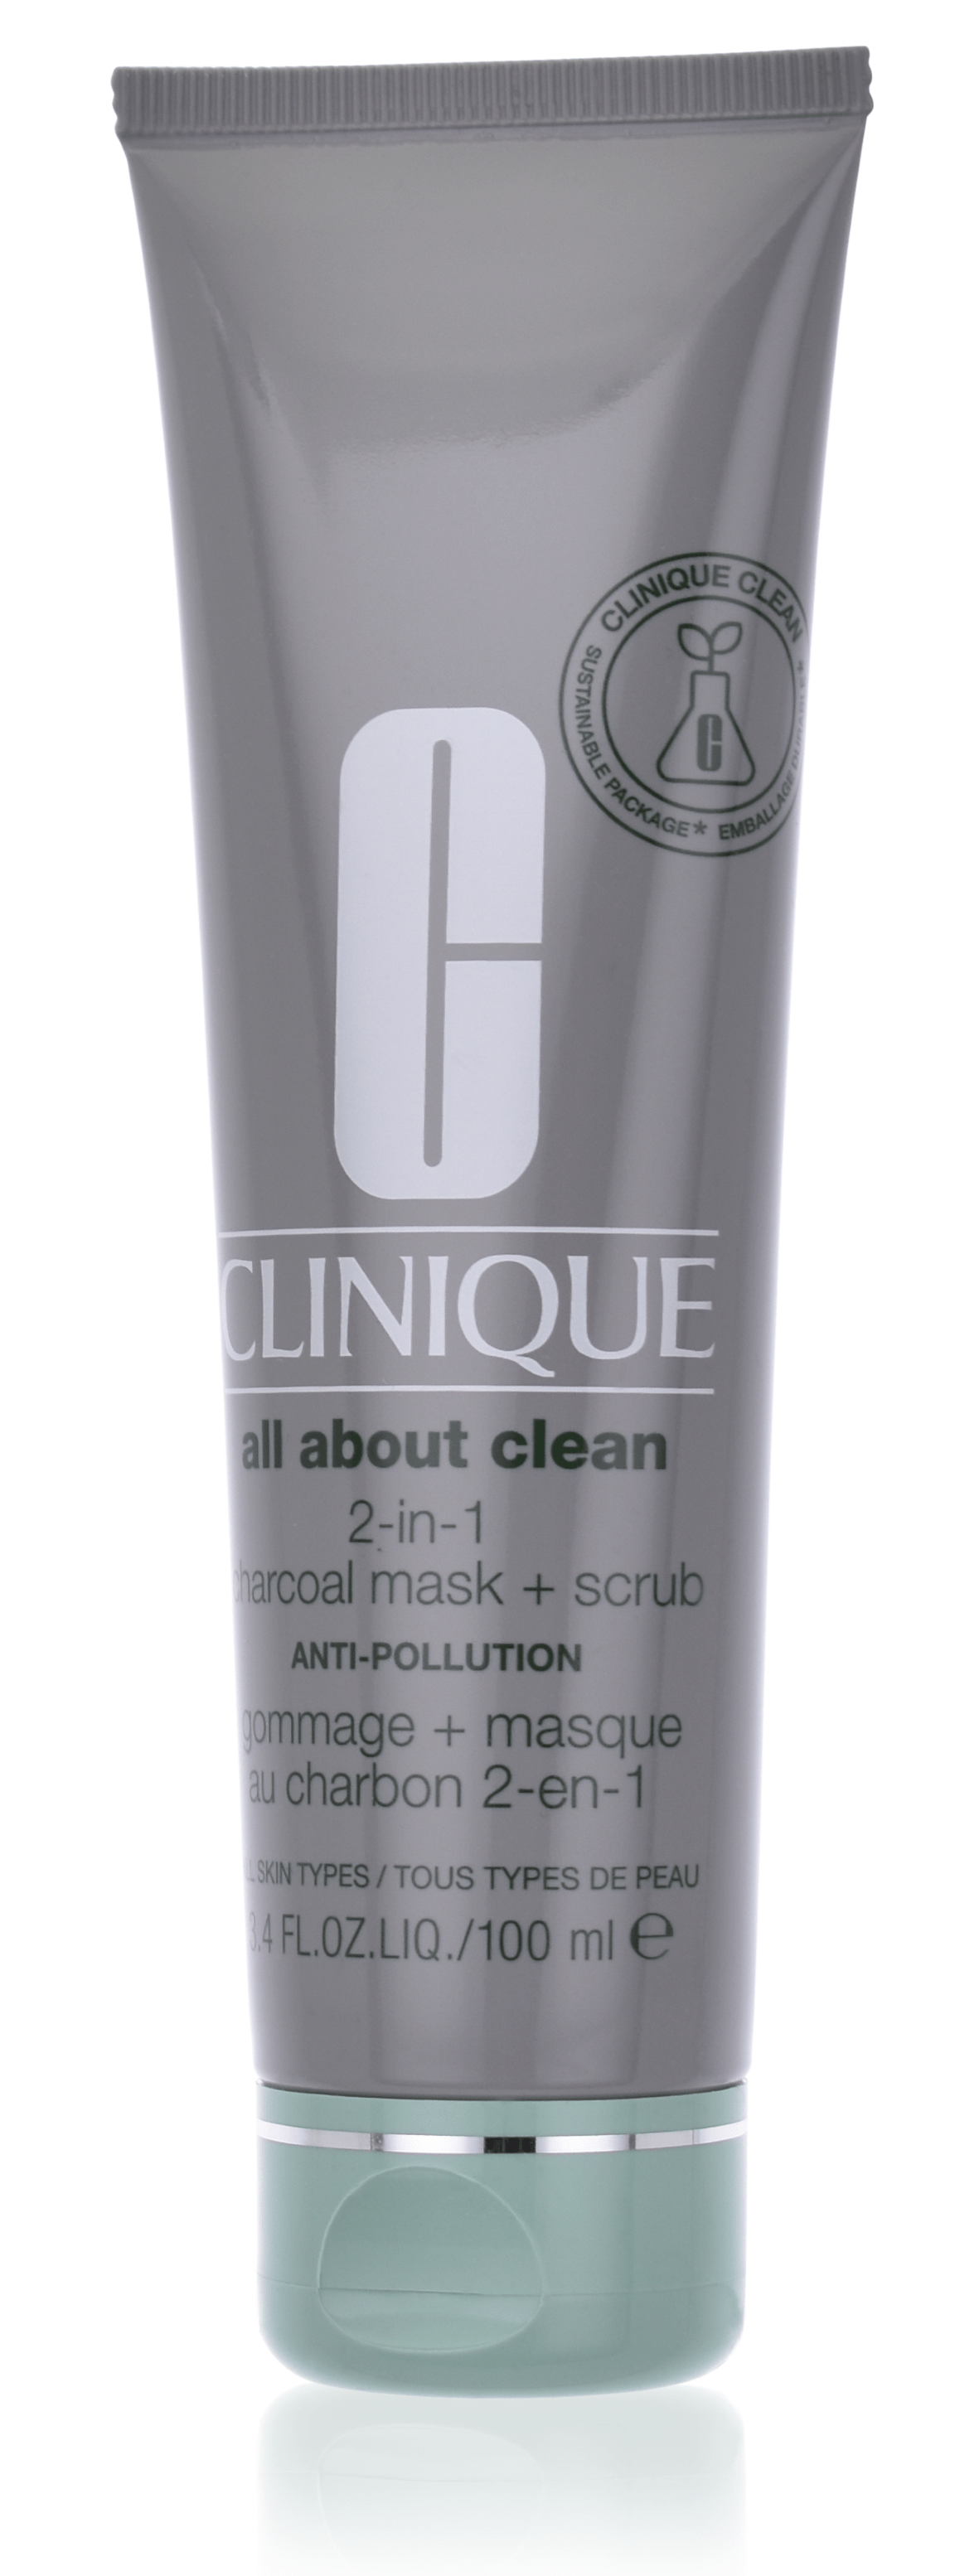 Clinique All About Clean - 2-in-1 Charcoal Mask + Scrub 100 ml